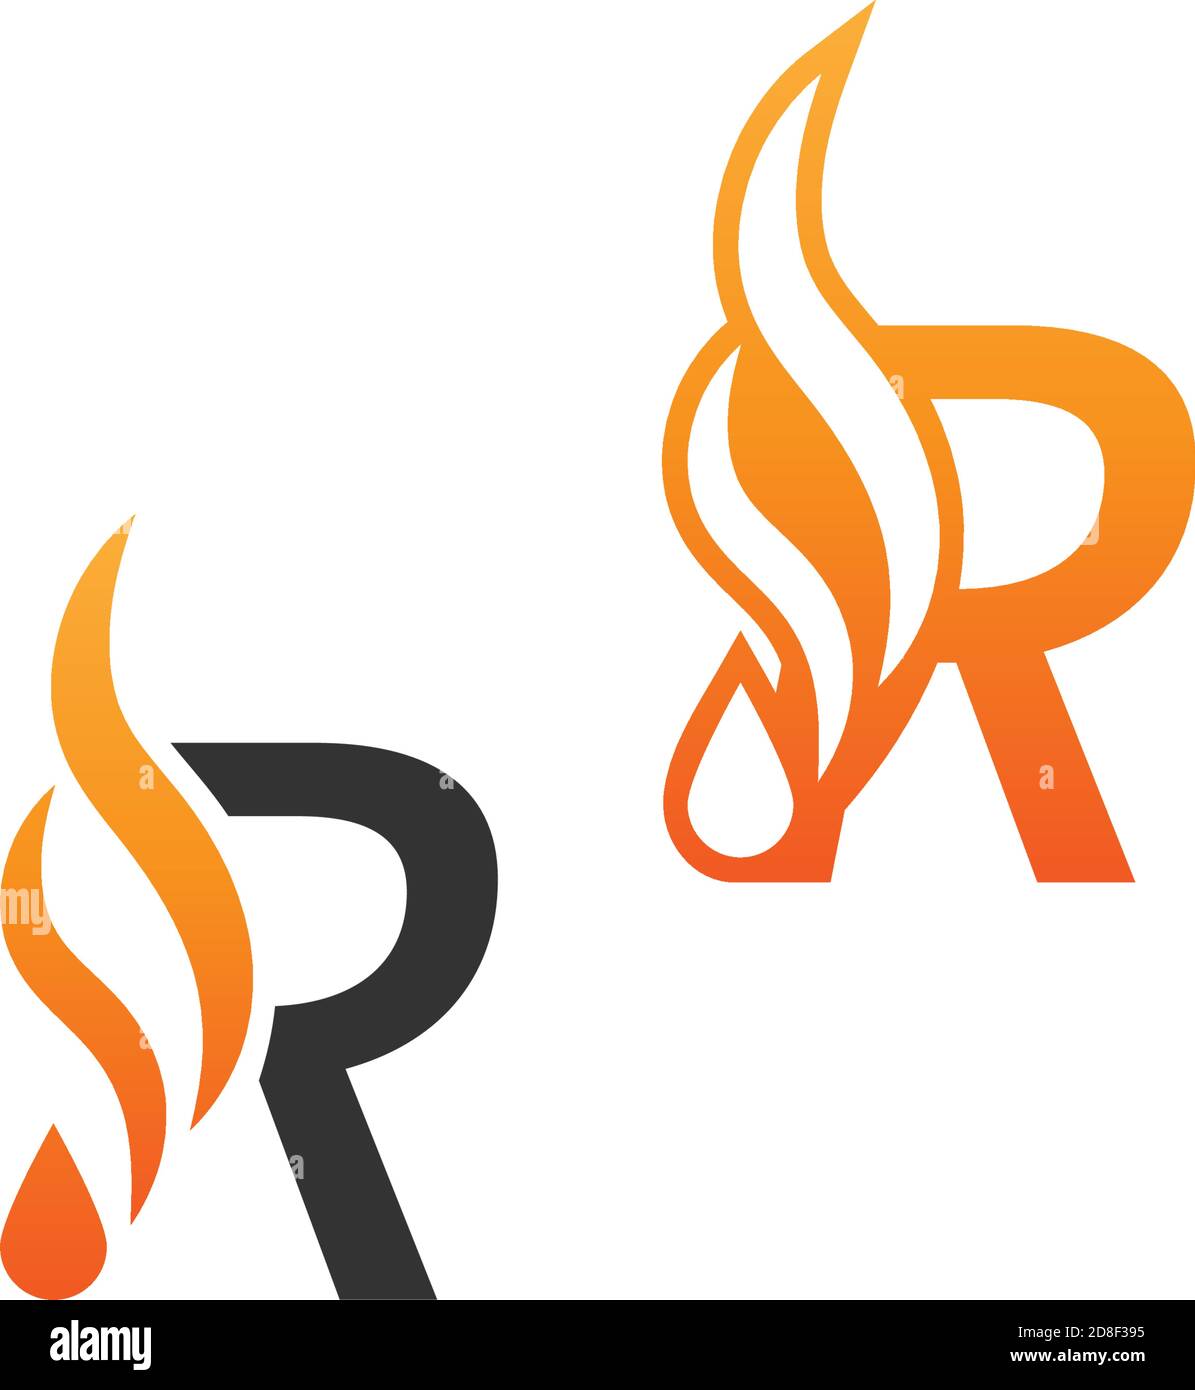 Rr r letter logo with fire flames design Vector Image